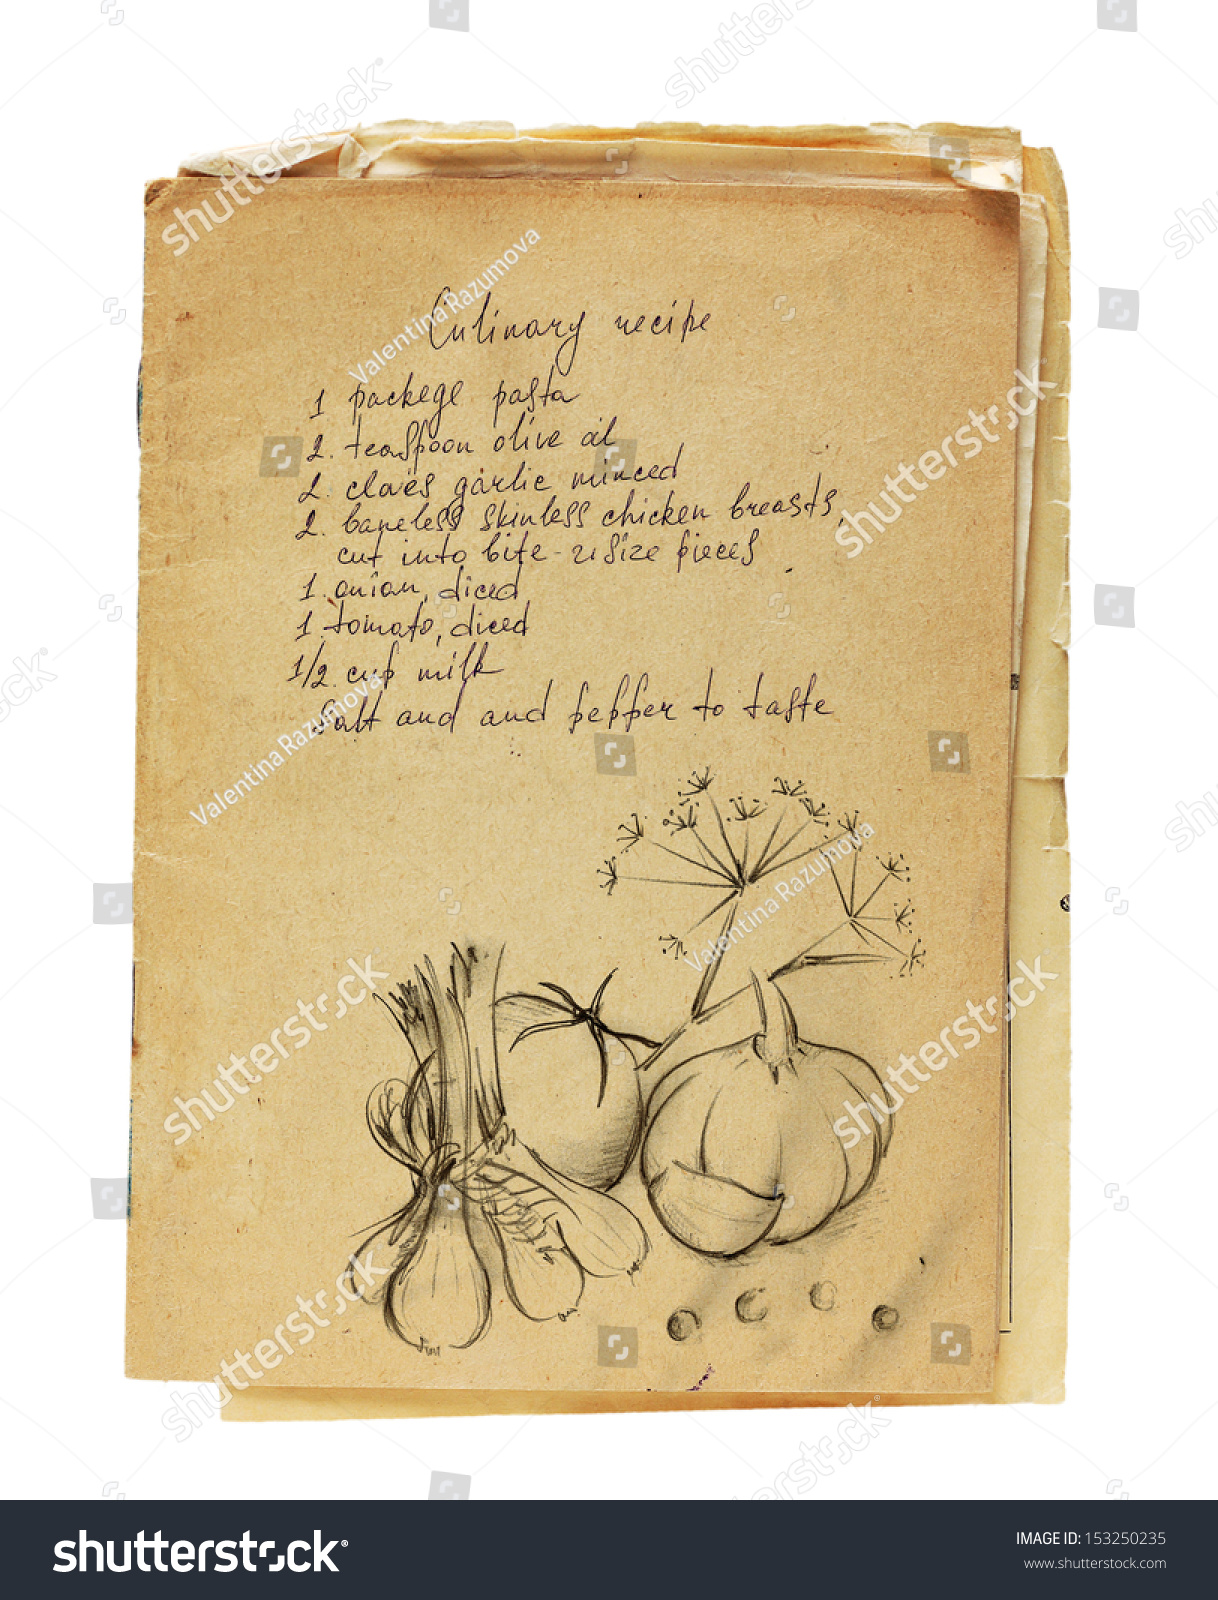 Old recipe book isolated on white background. #153250235